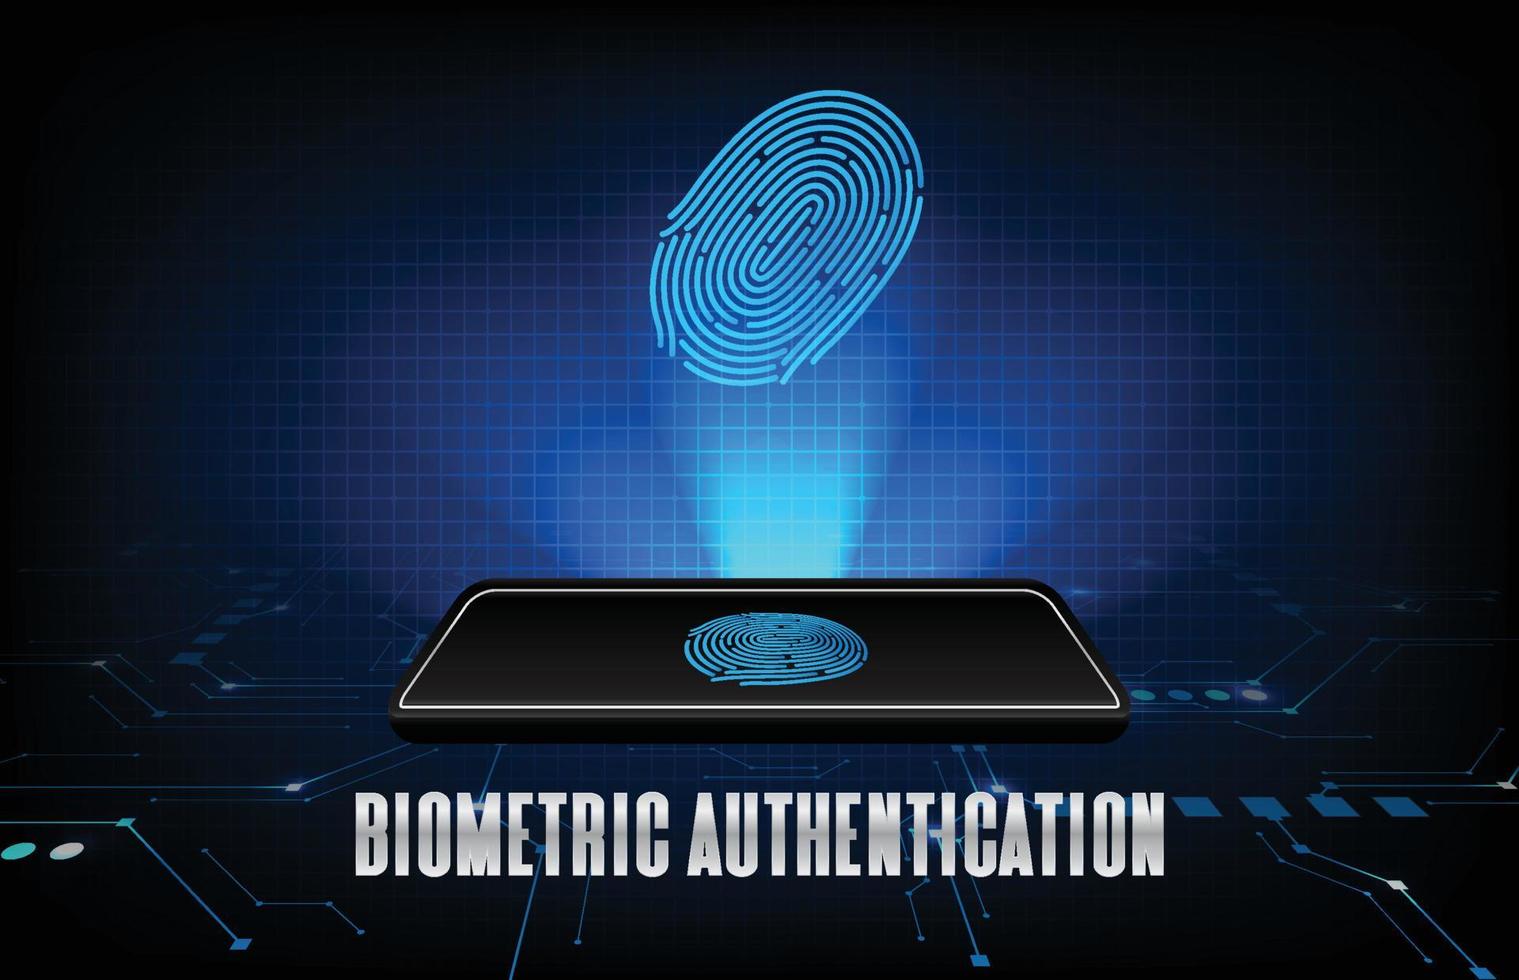 abstract background of futuristic technology smart mobile phone with Fingerprint biometric authentication vector